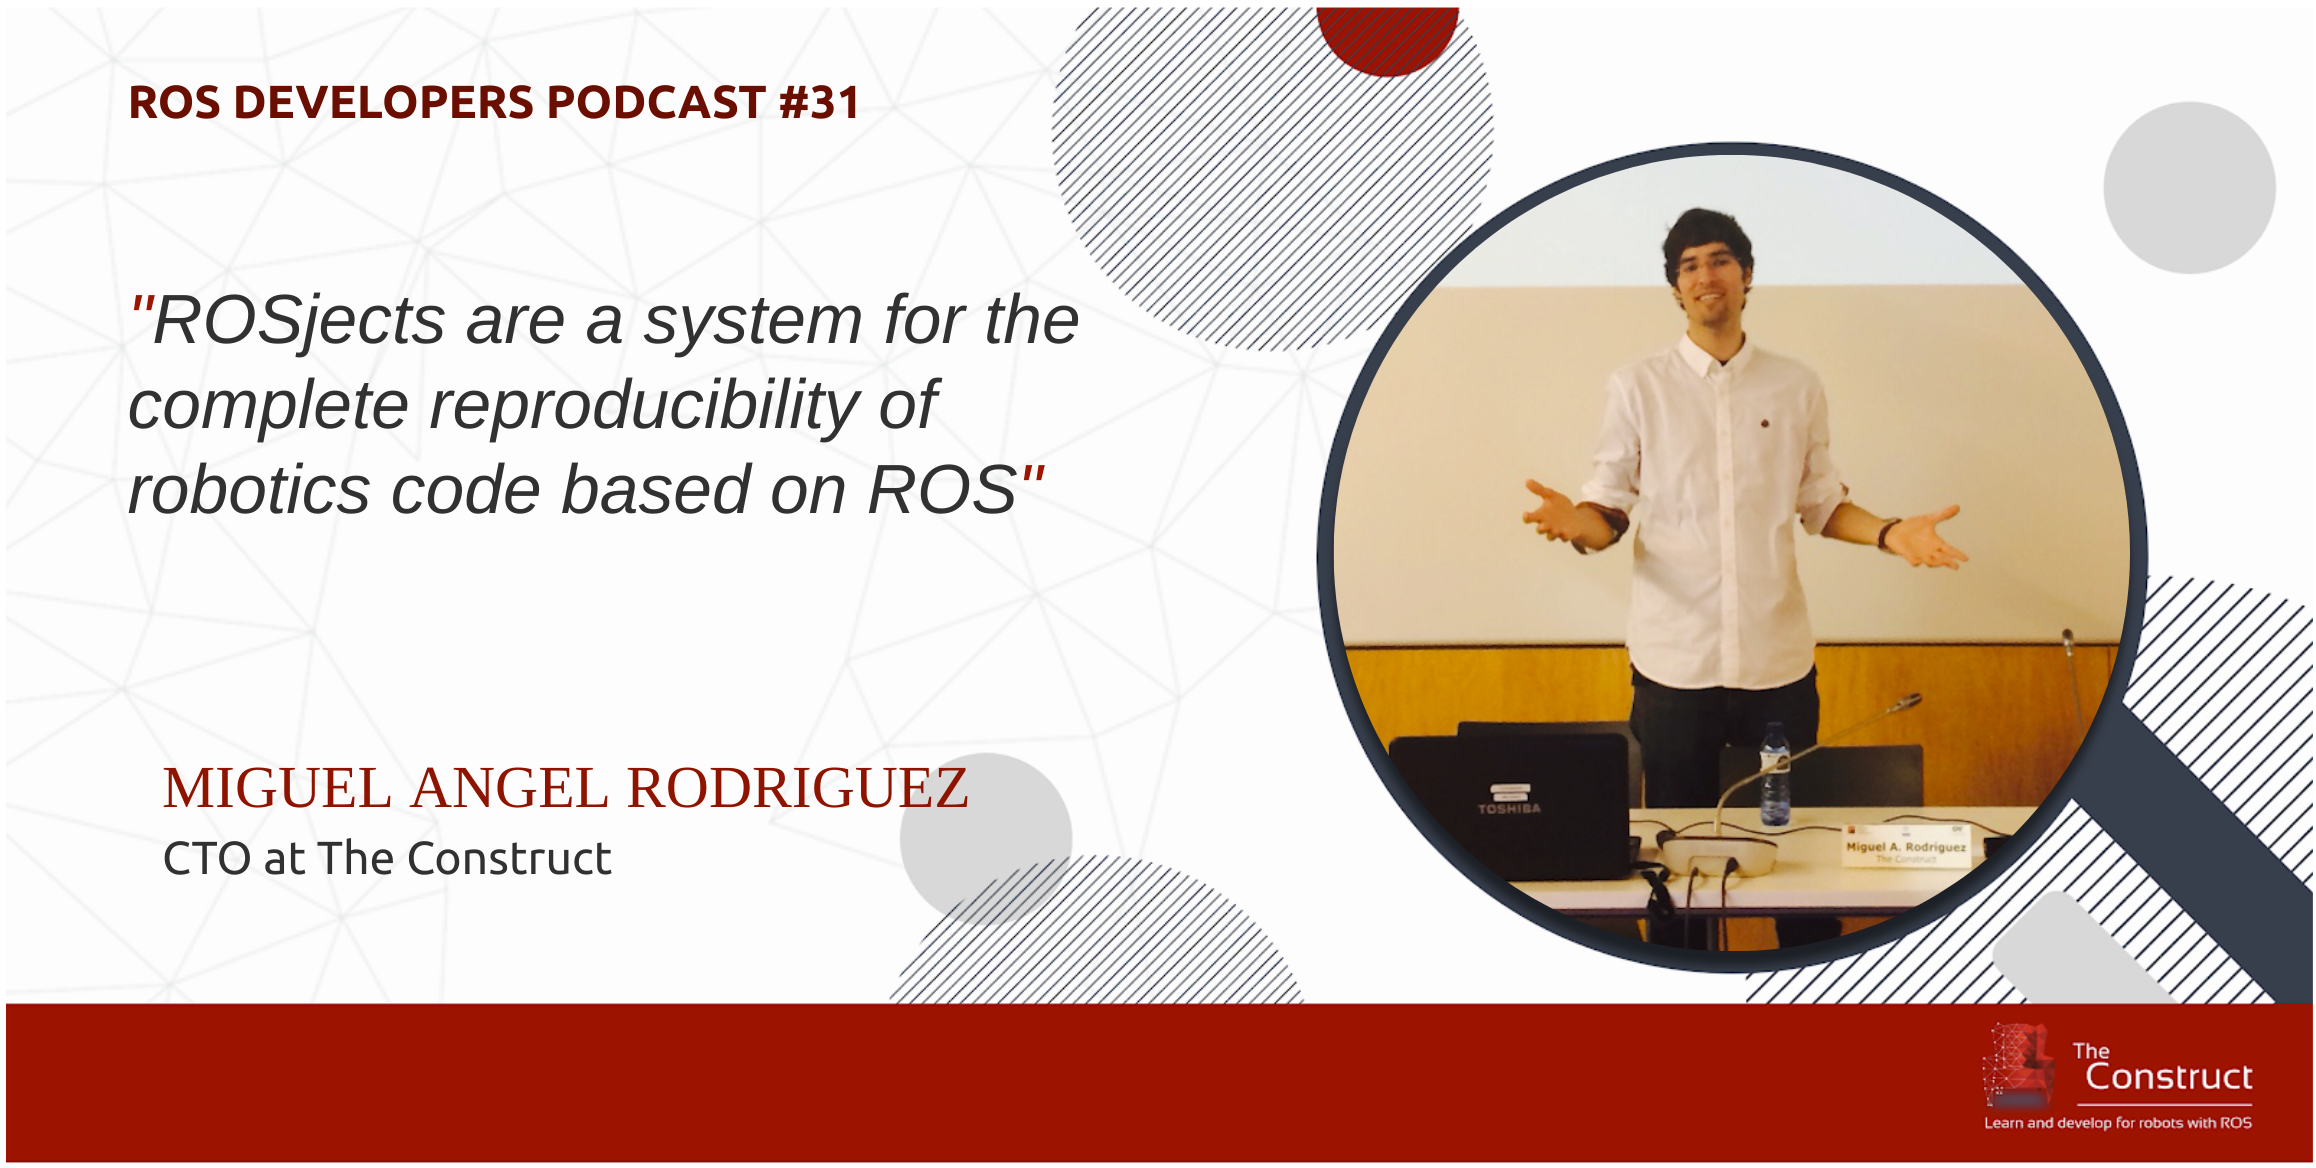 Miguel Angel Rodriguez ROSjects ROS Developers Podcast